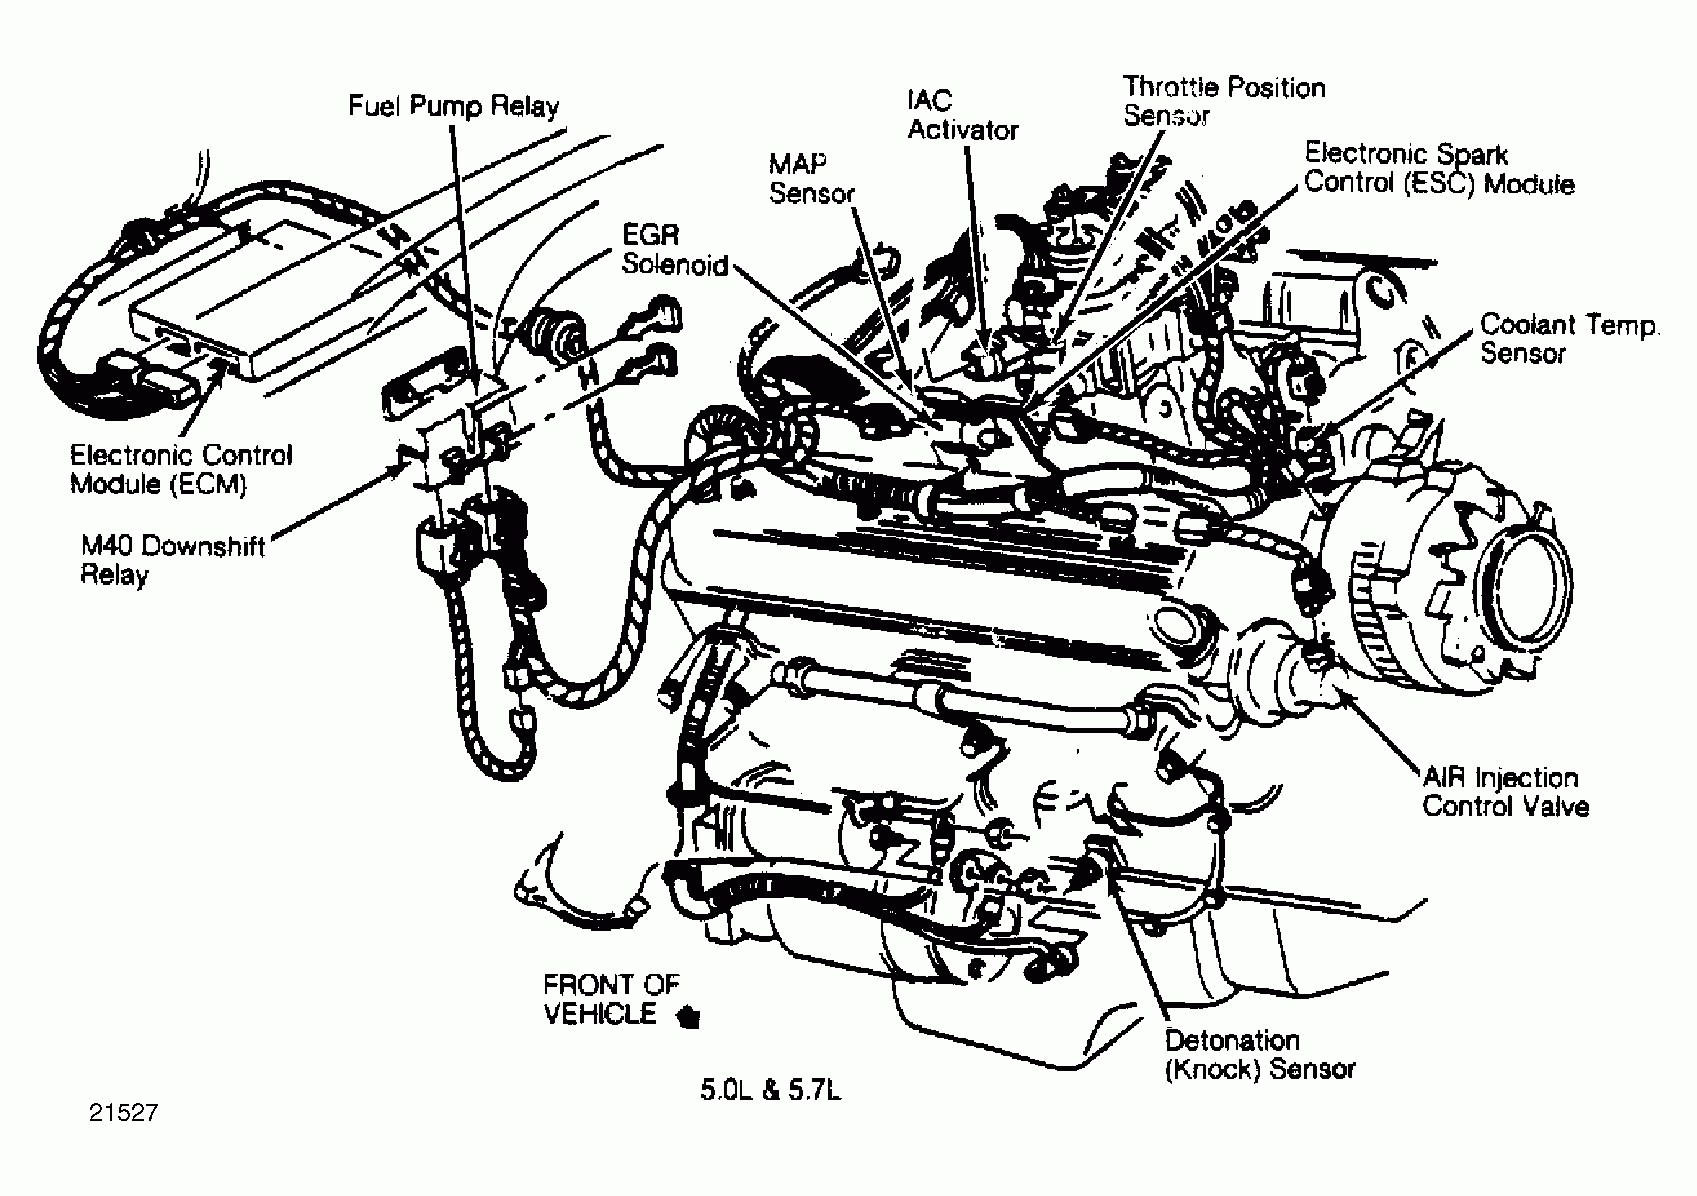 Exploded Car Diagram 350 Chevy Engine Parts Diagram Wiring Diagrams Konsult Of Exploded Car Diagram